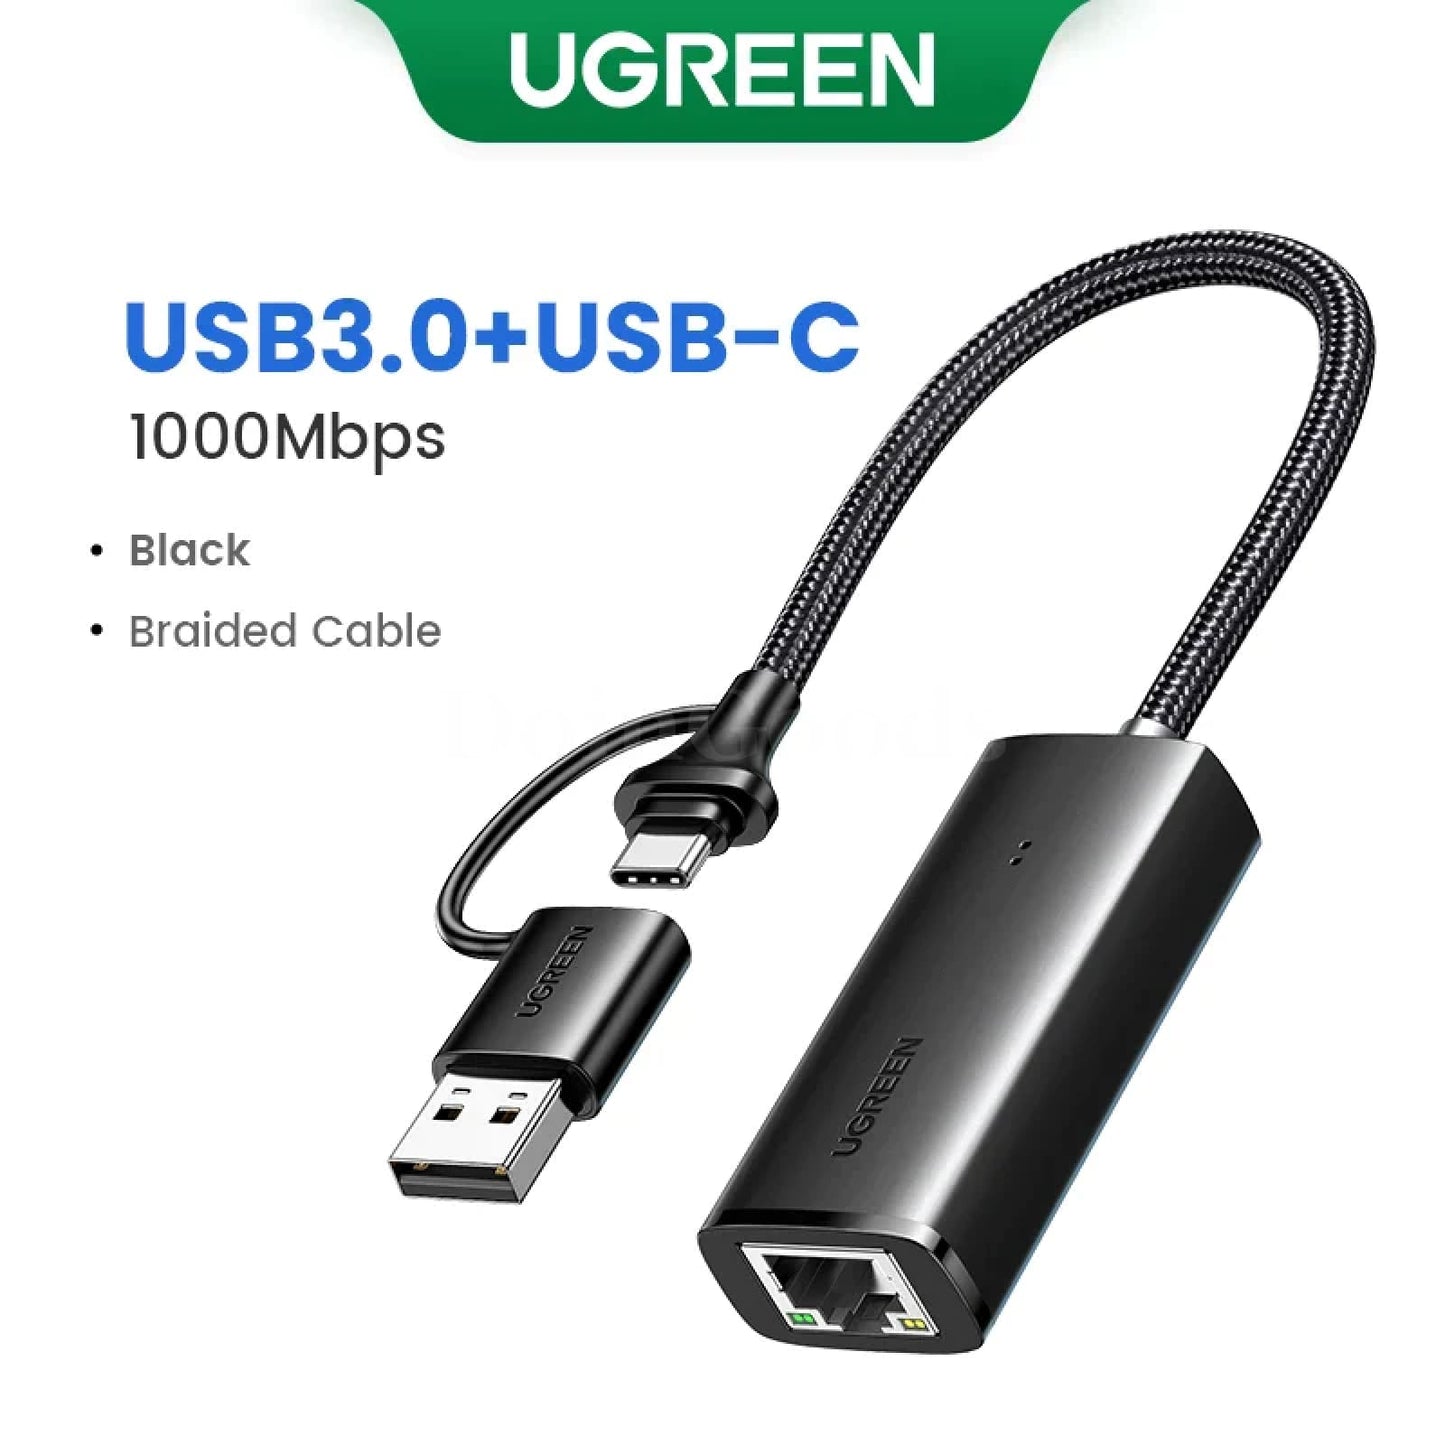 Ugreen Usb 3.0 Ethernet Adapter Network Card For Win 10 Pc Xiaomi Mi Box 2-In-1 Model 301635